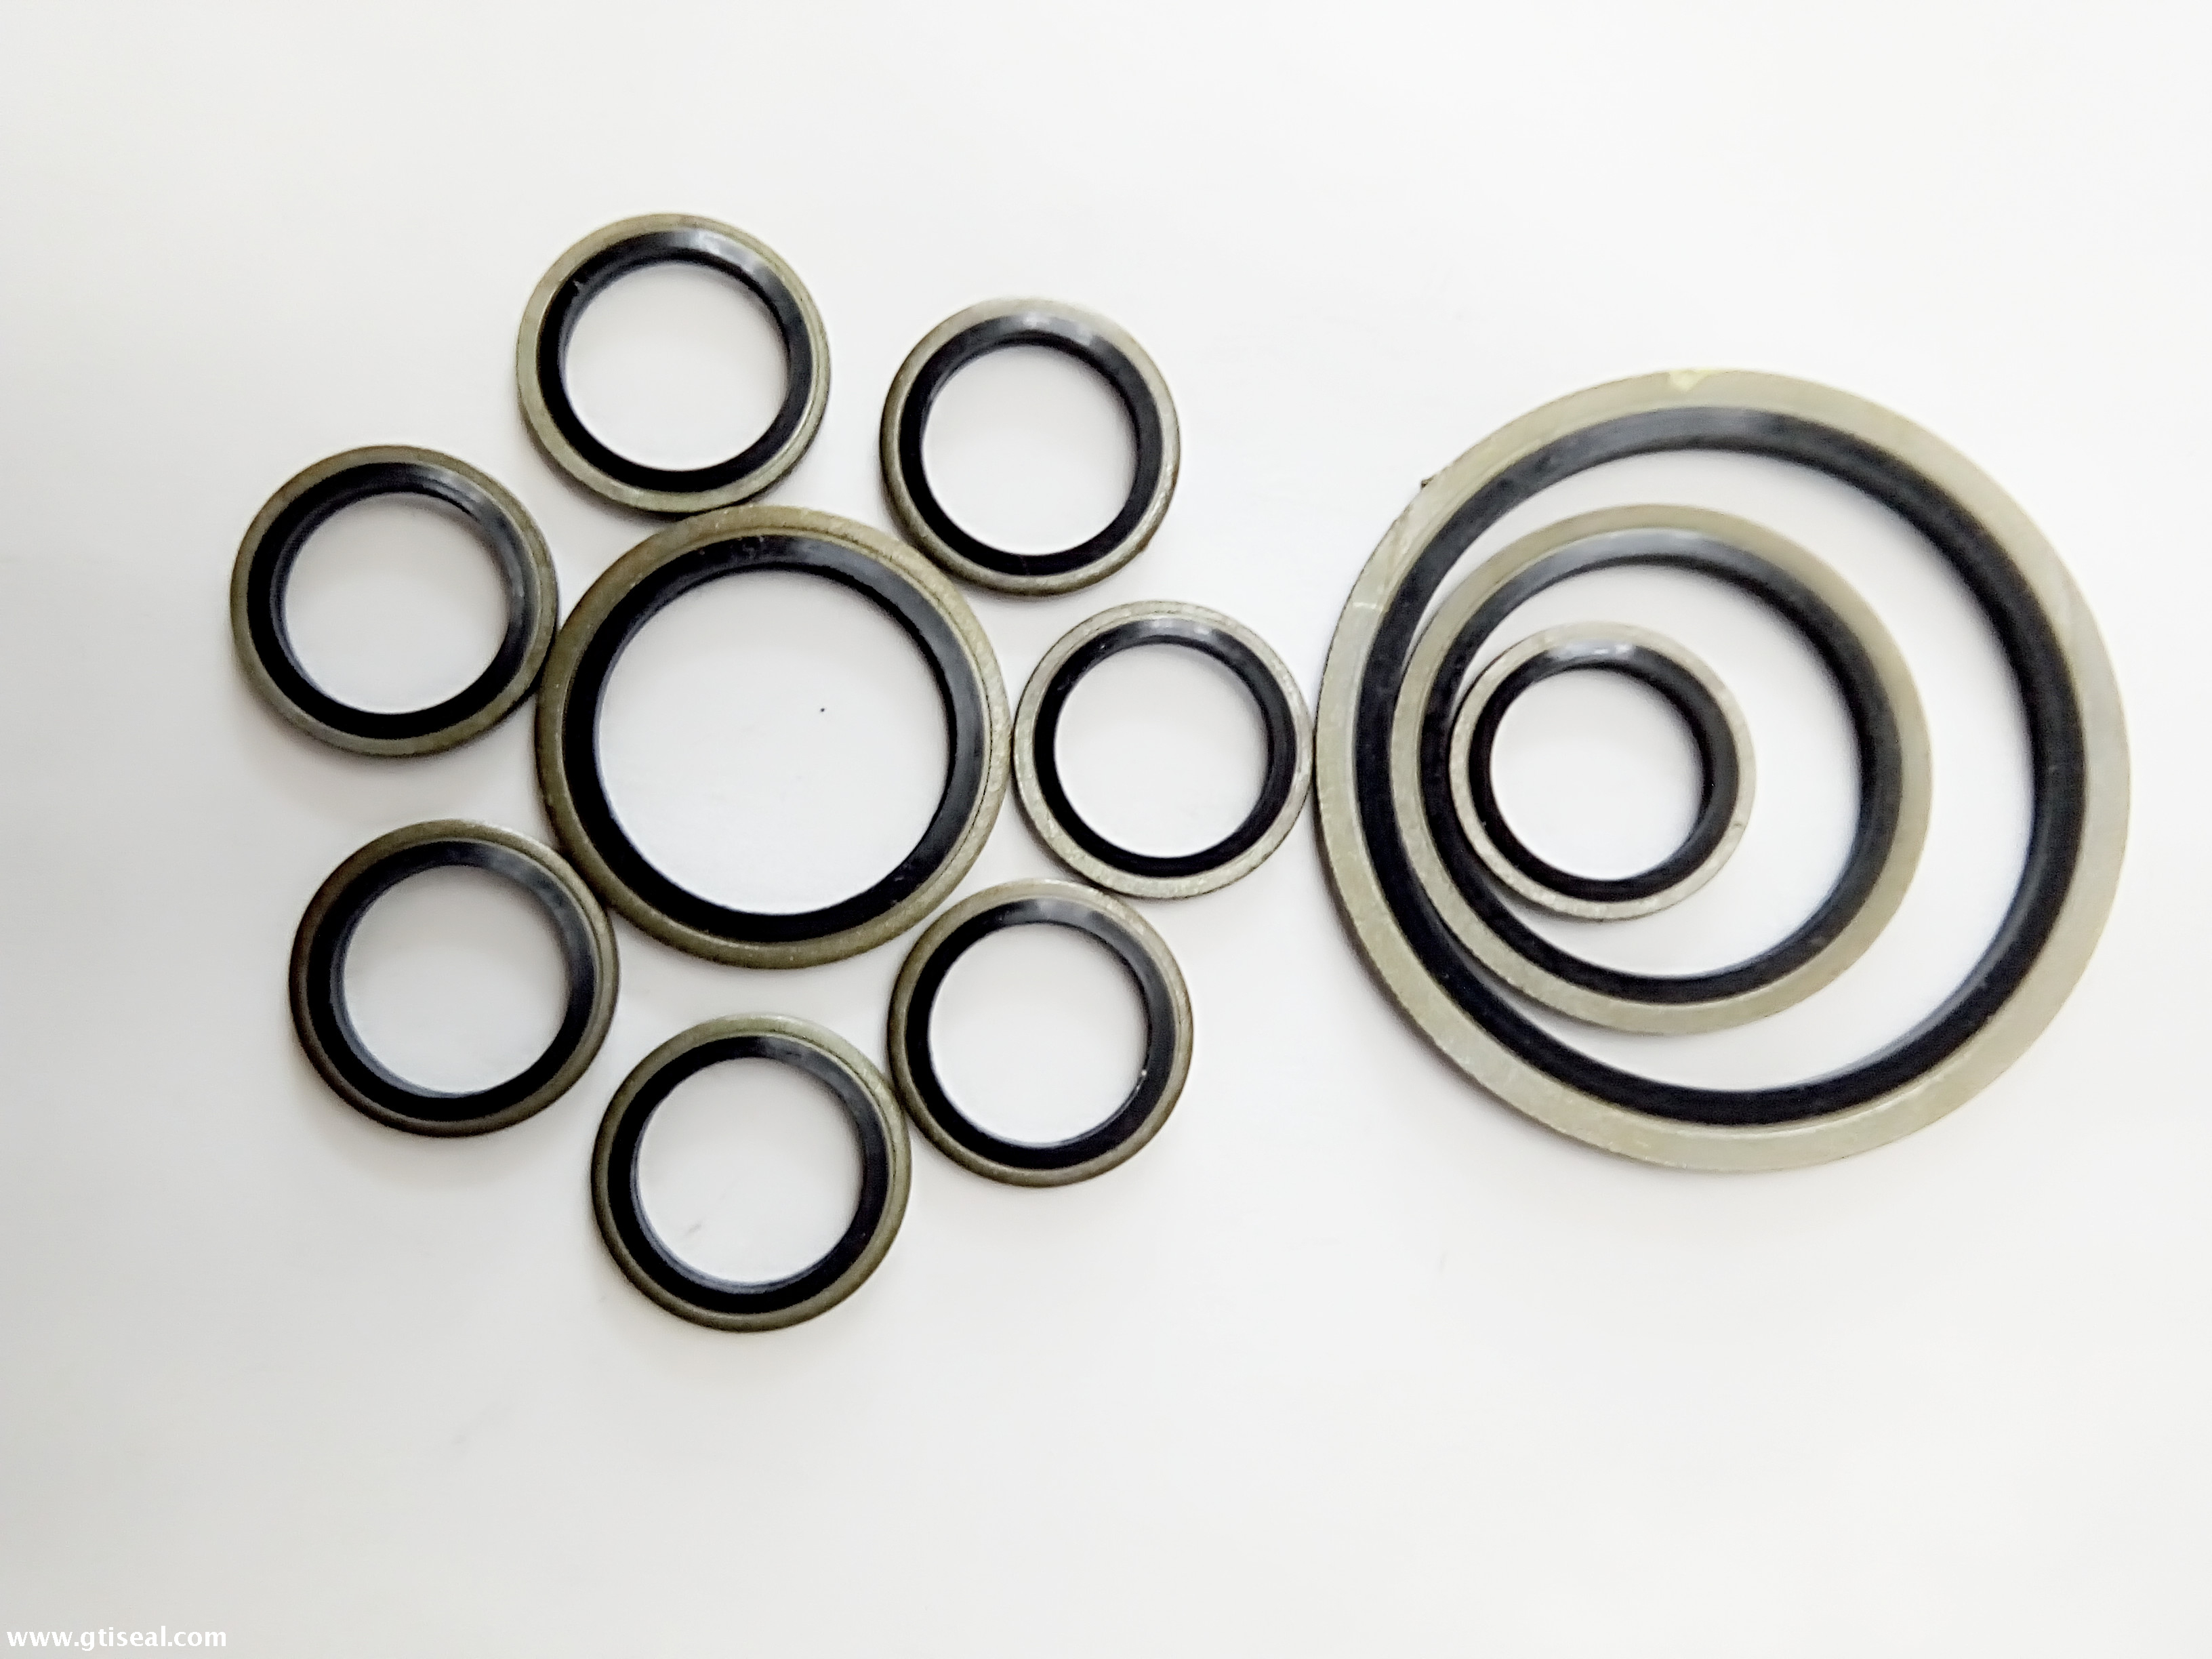 stainless steel rubber NBR bonded seals/bonded seal washer 